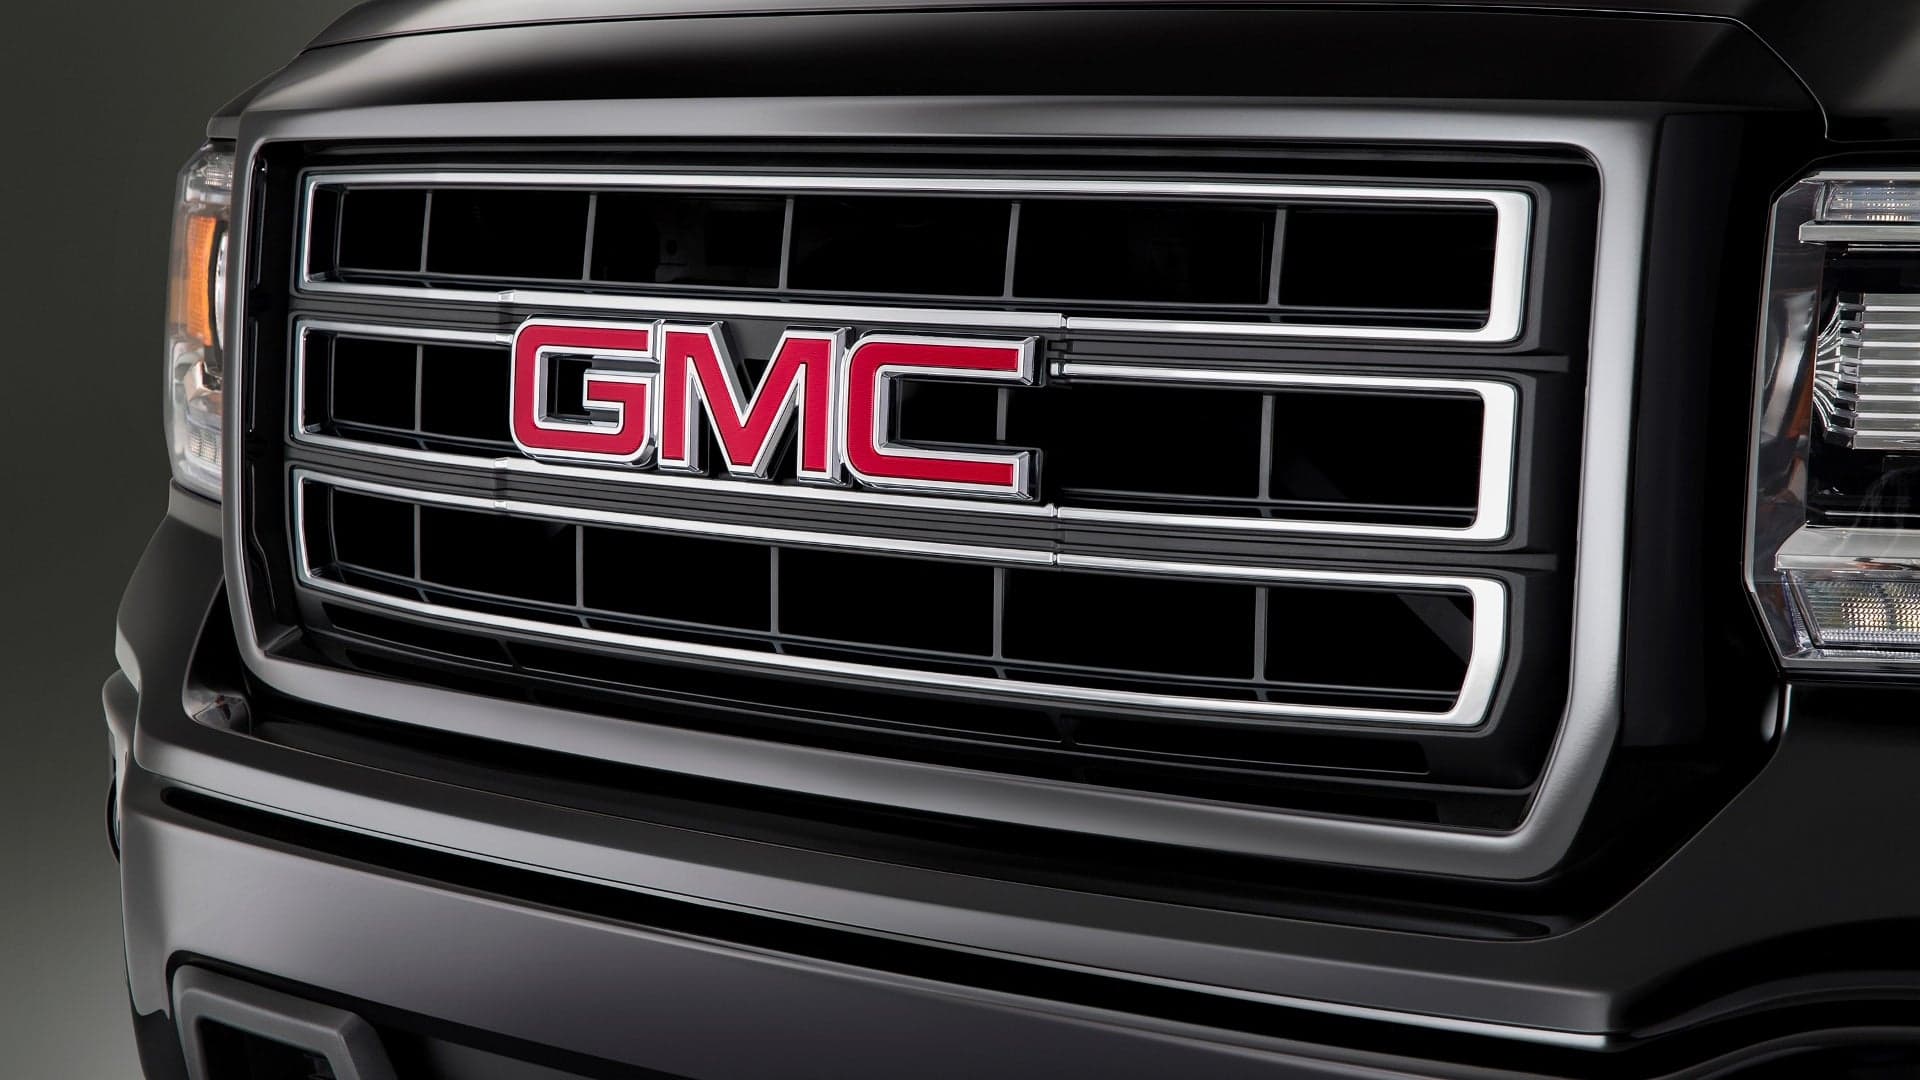 2019 GMC Sierra Unveiling Scheduled for March 1